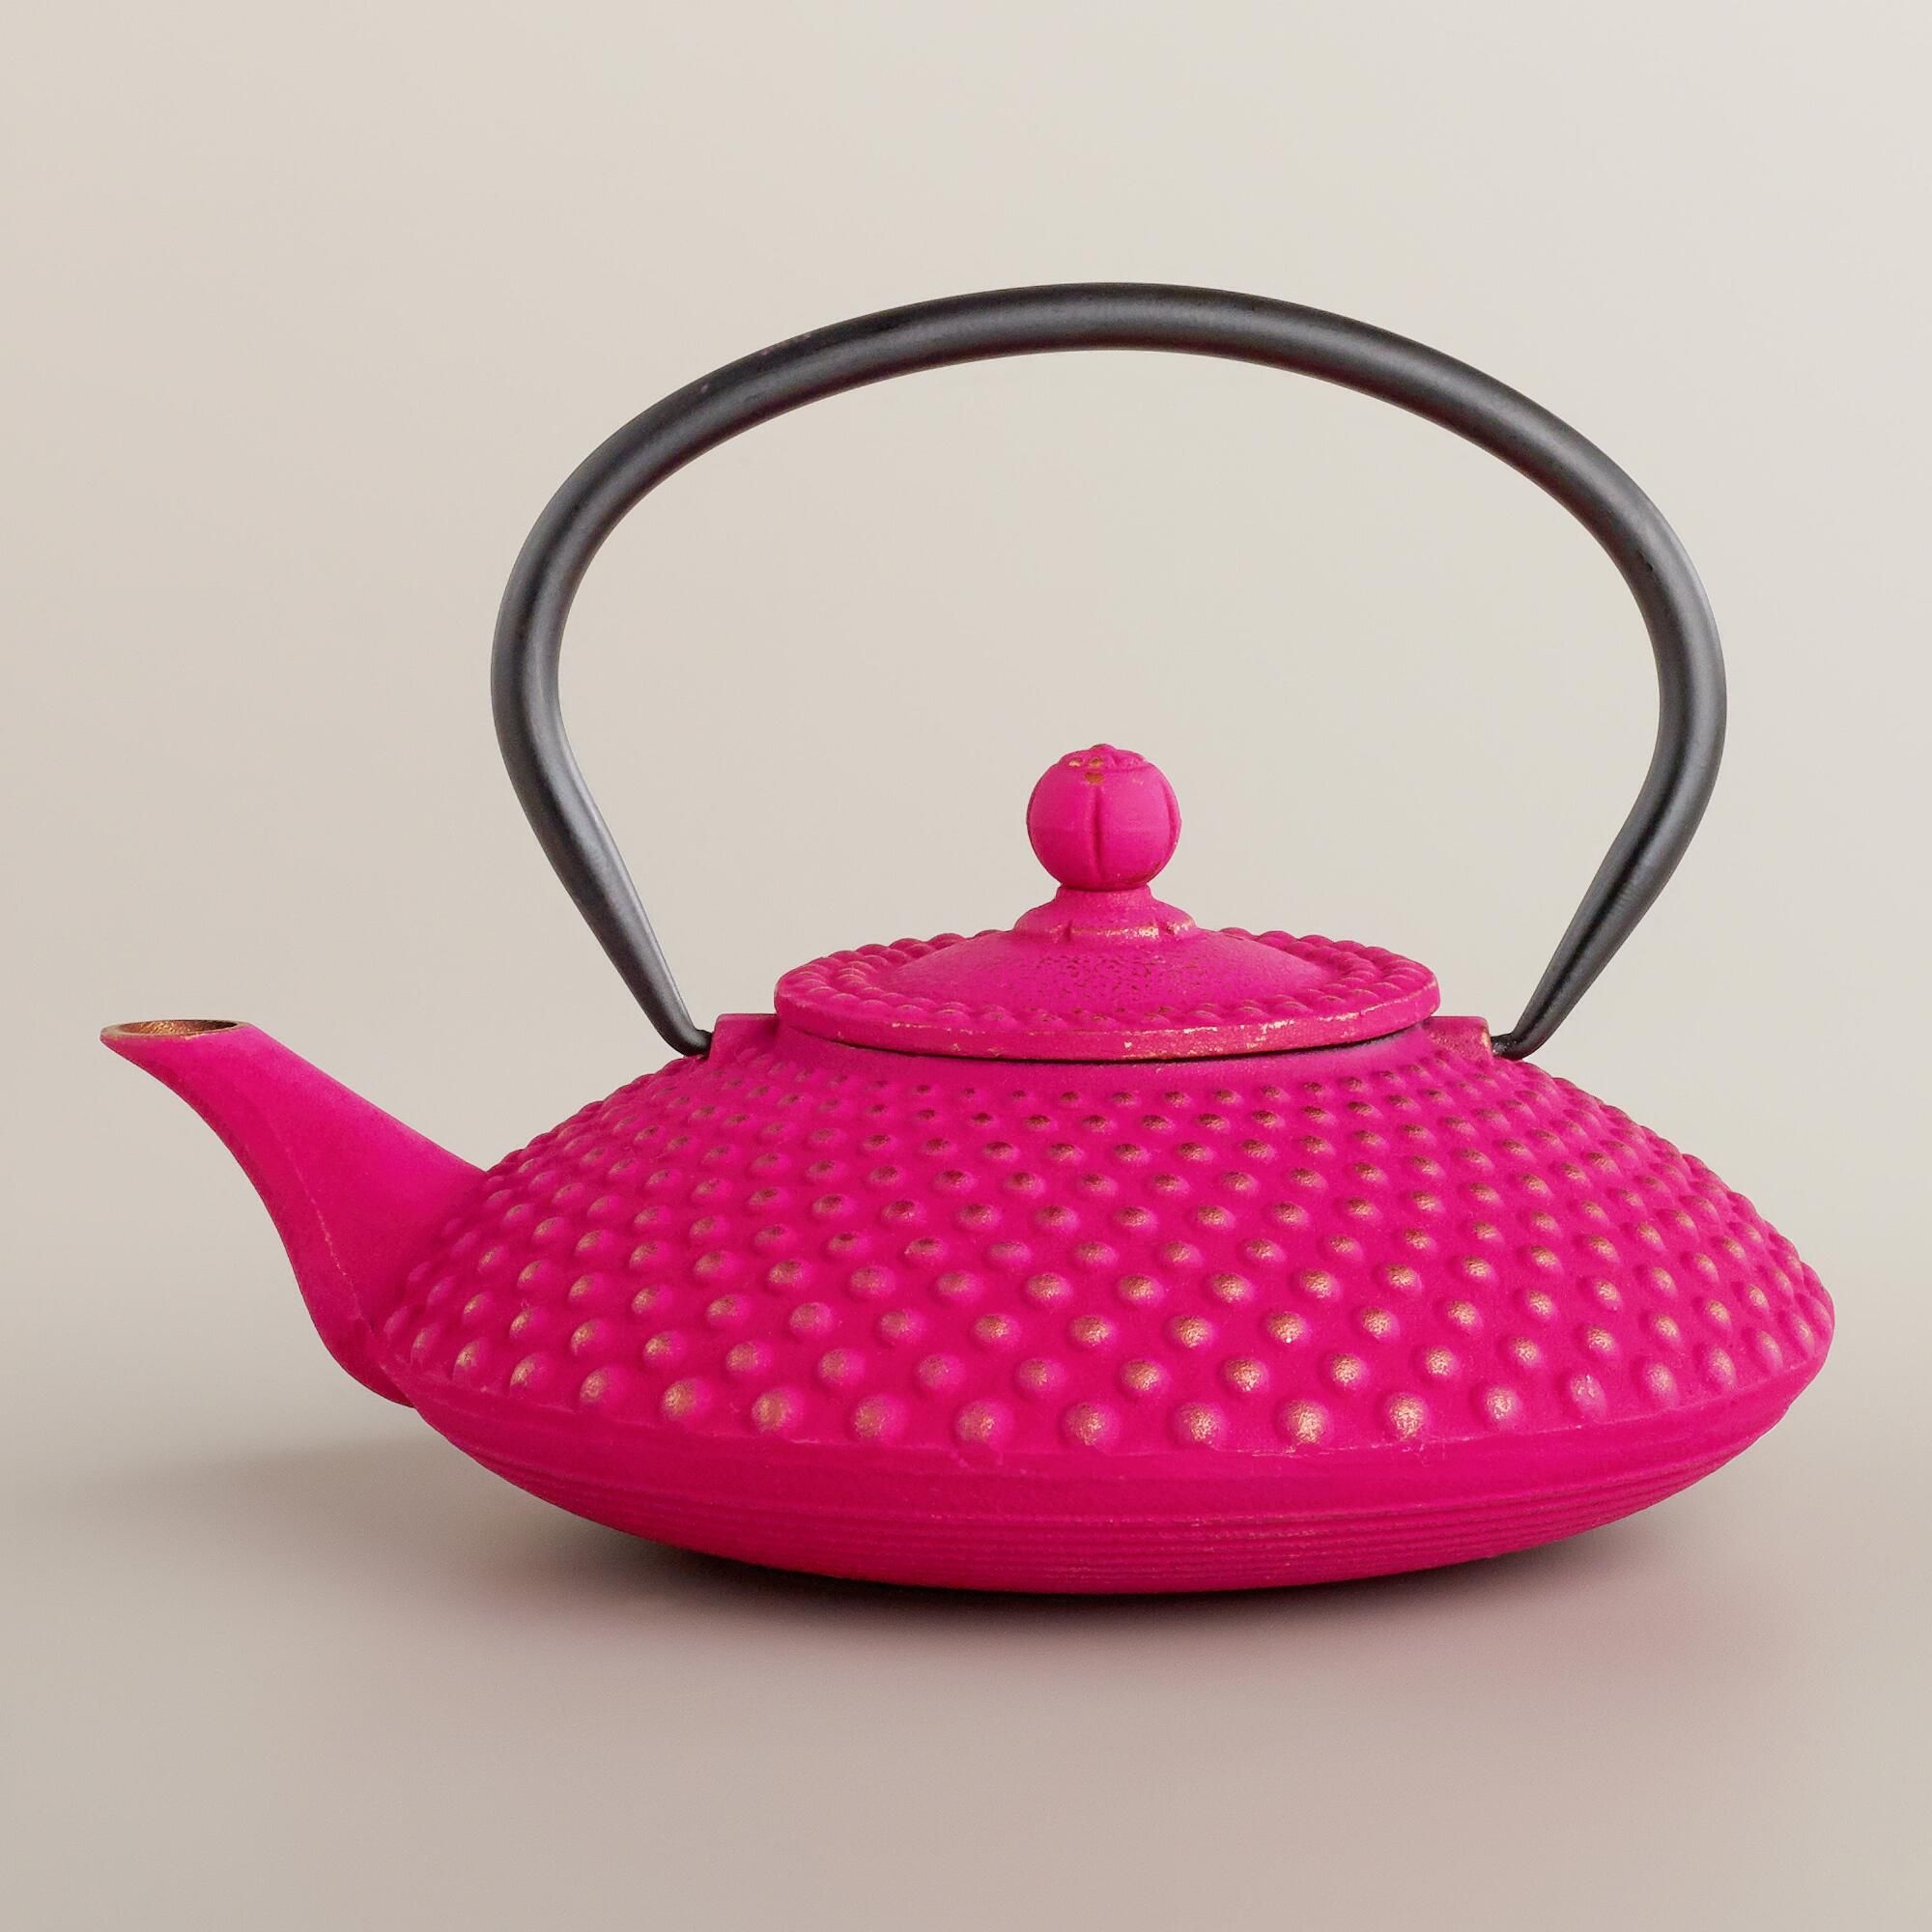 Hot pink kettle